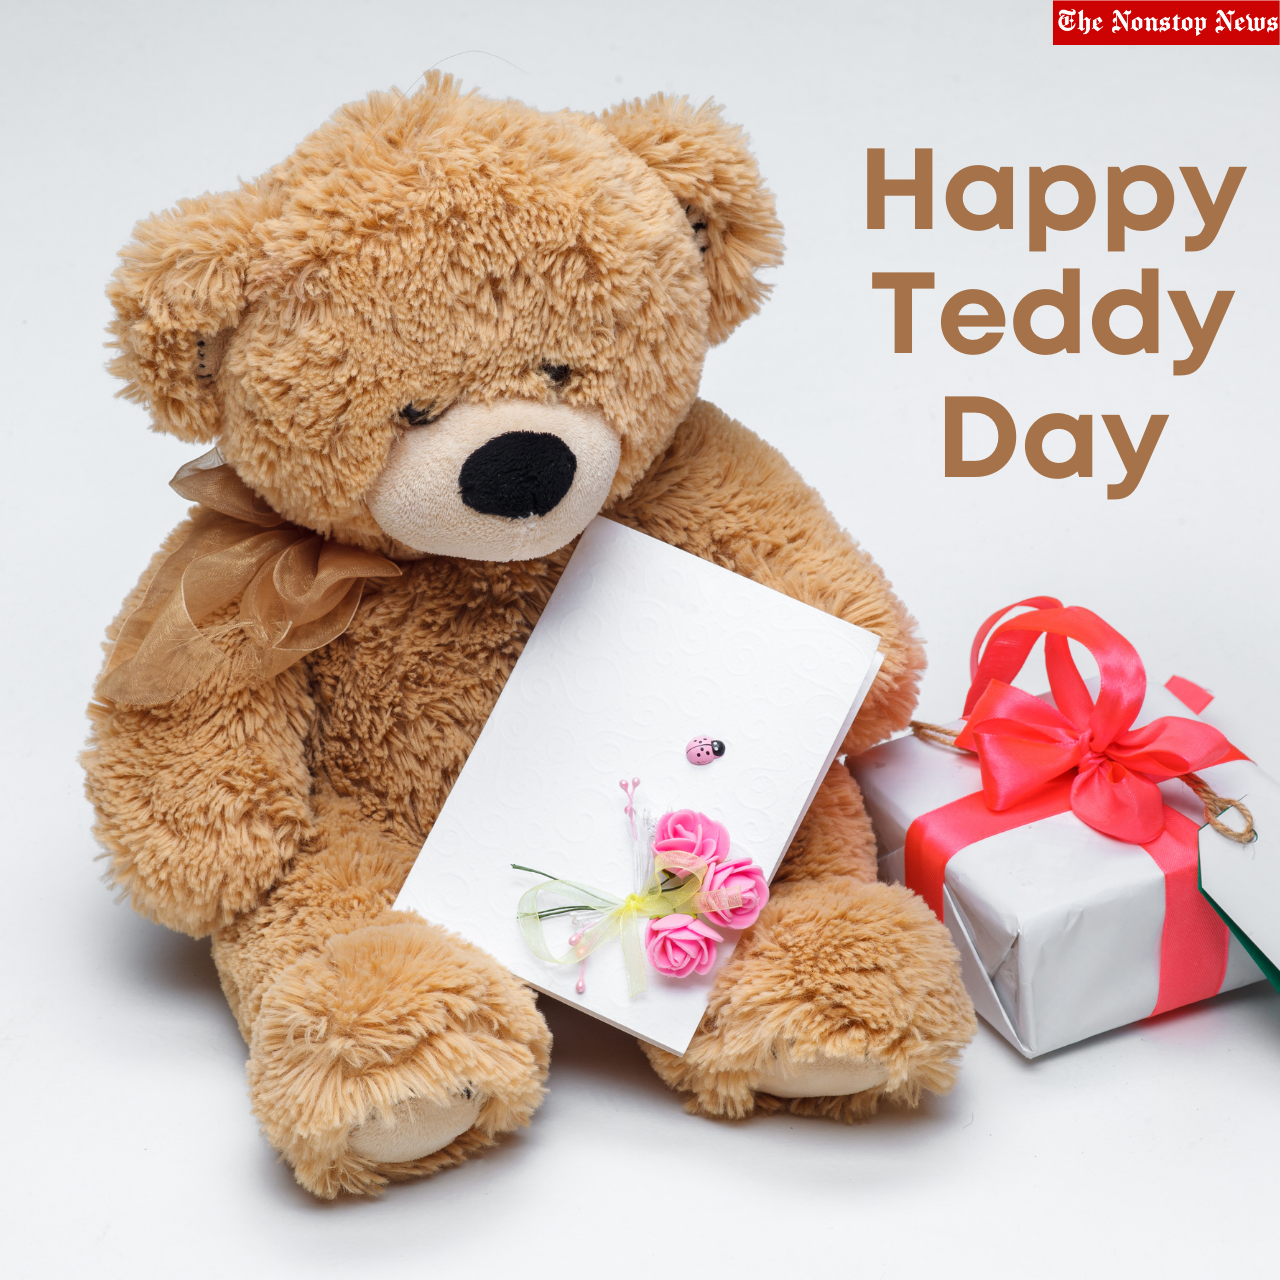 Teddy Day 2022: Wishes, Quotes, HD Images, Messages, Status, Shayari to greet your love on the 4th day of Valentine's week